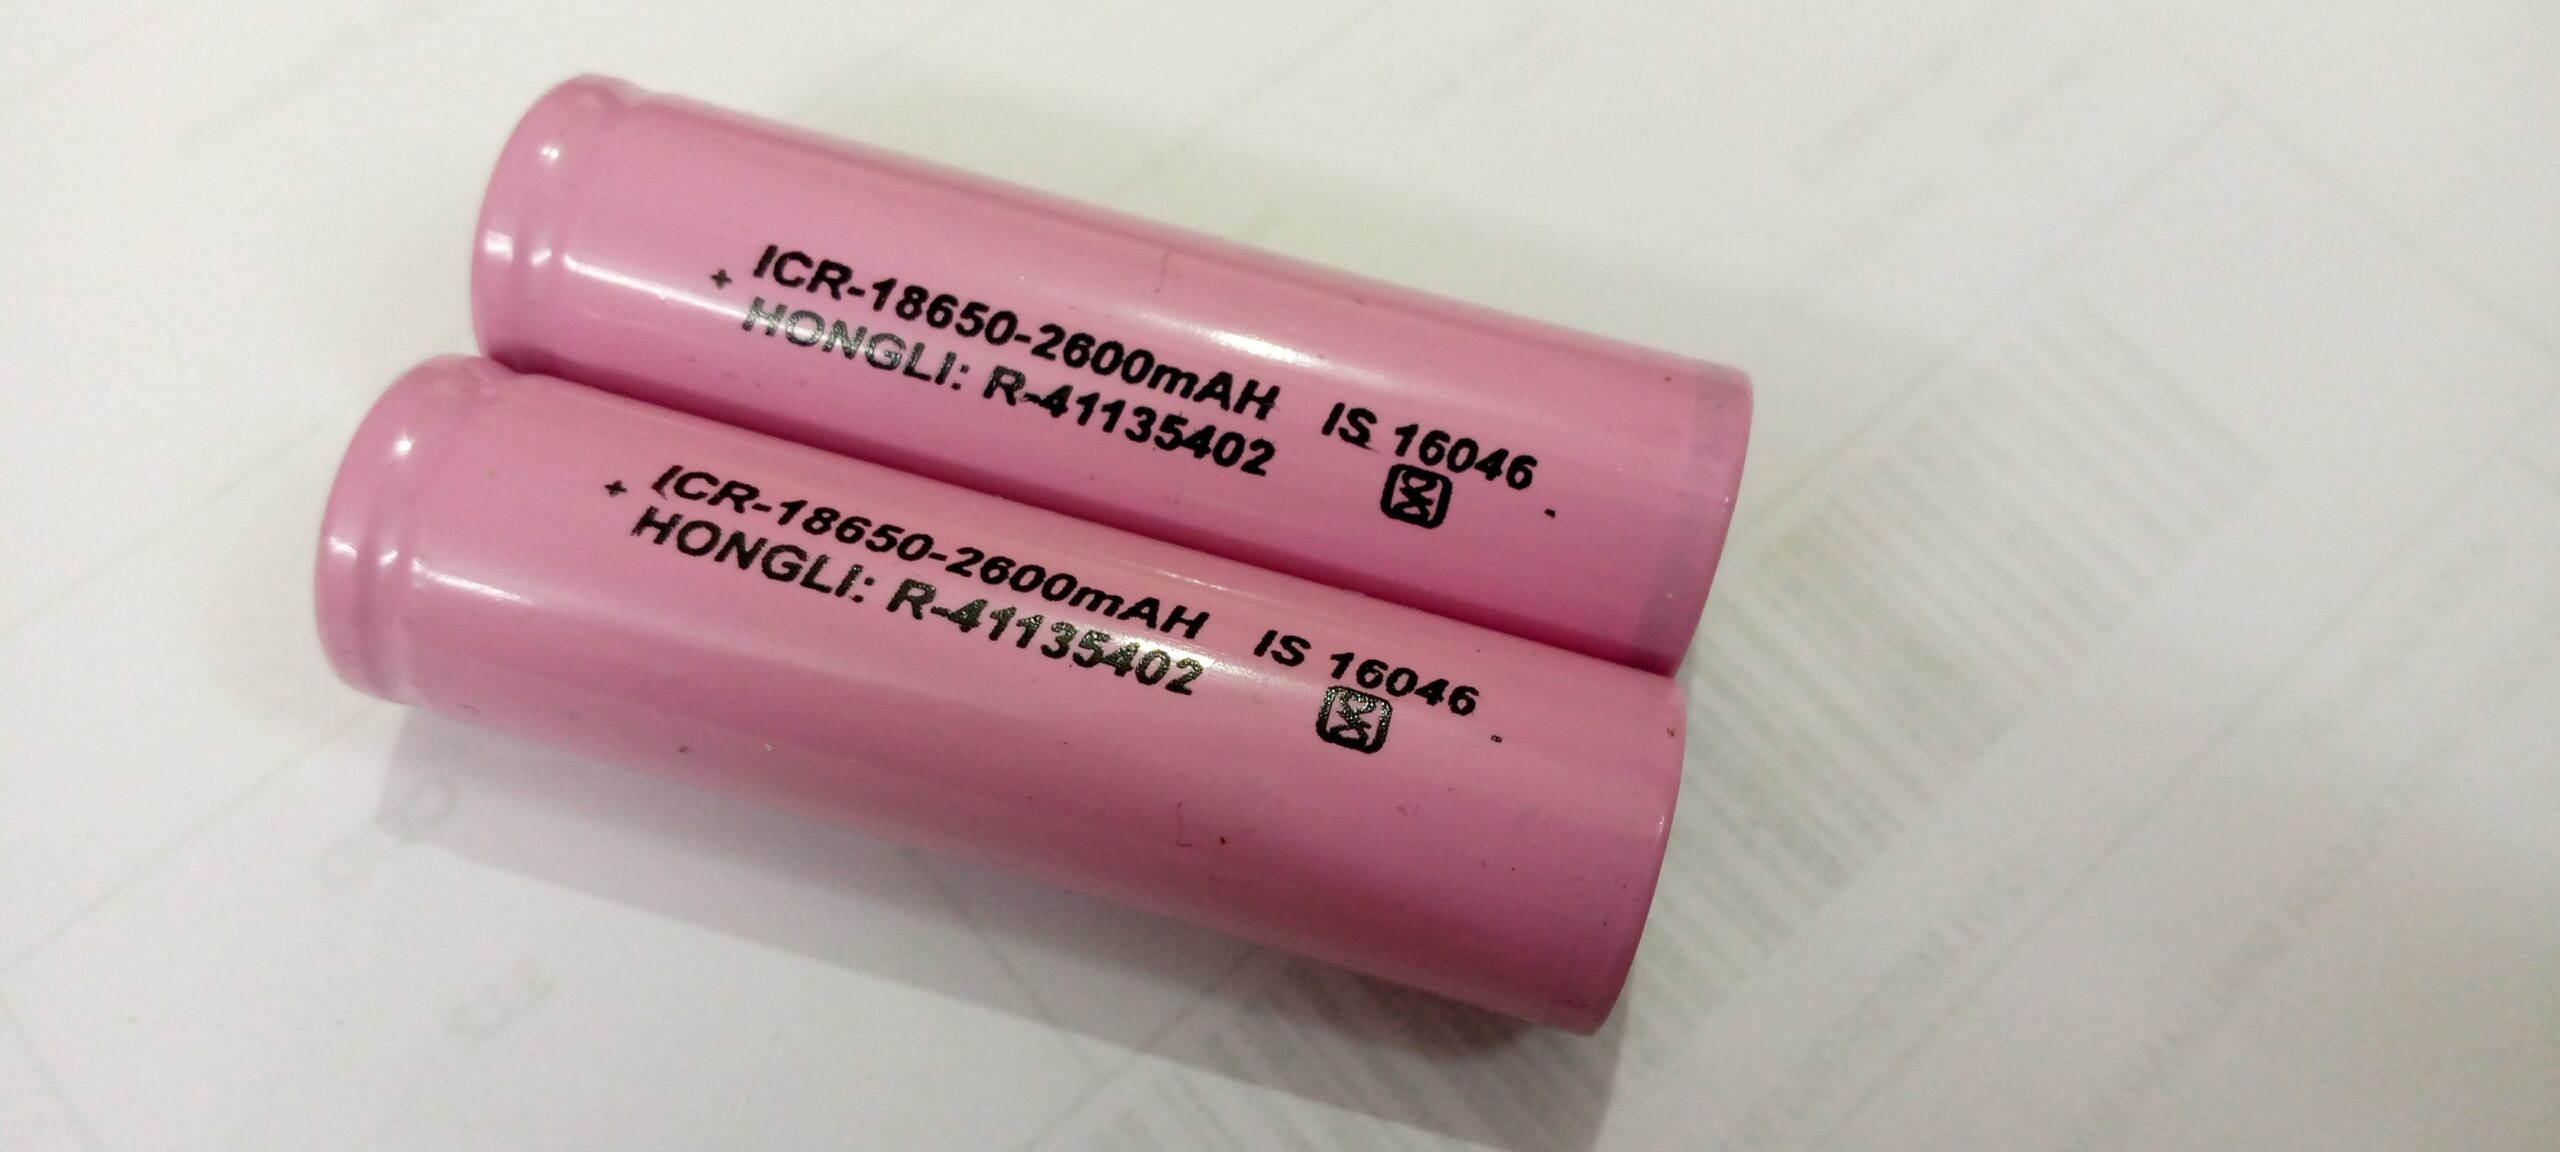 Pack of 2 Rechargeable Li-ion 18650 Battery 3.7V 2500mAh